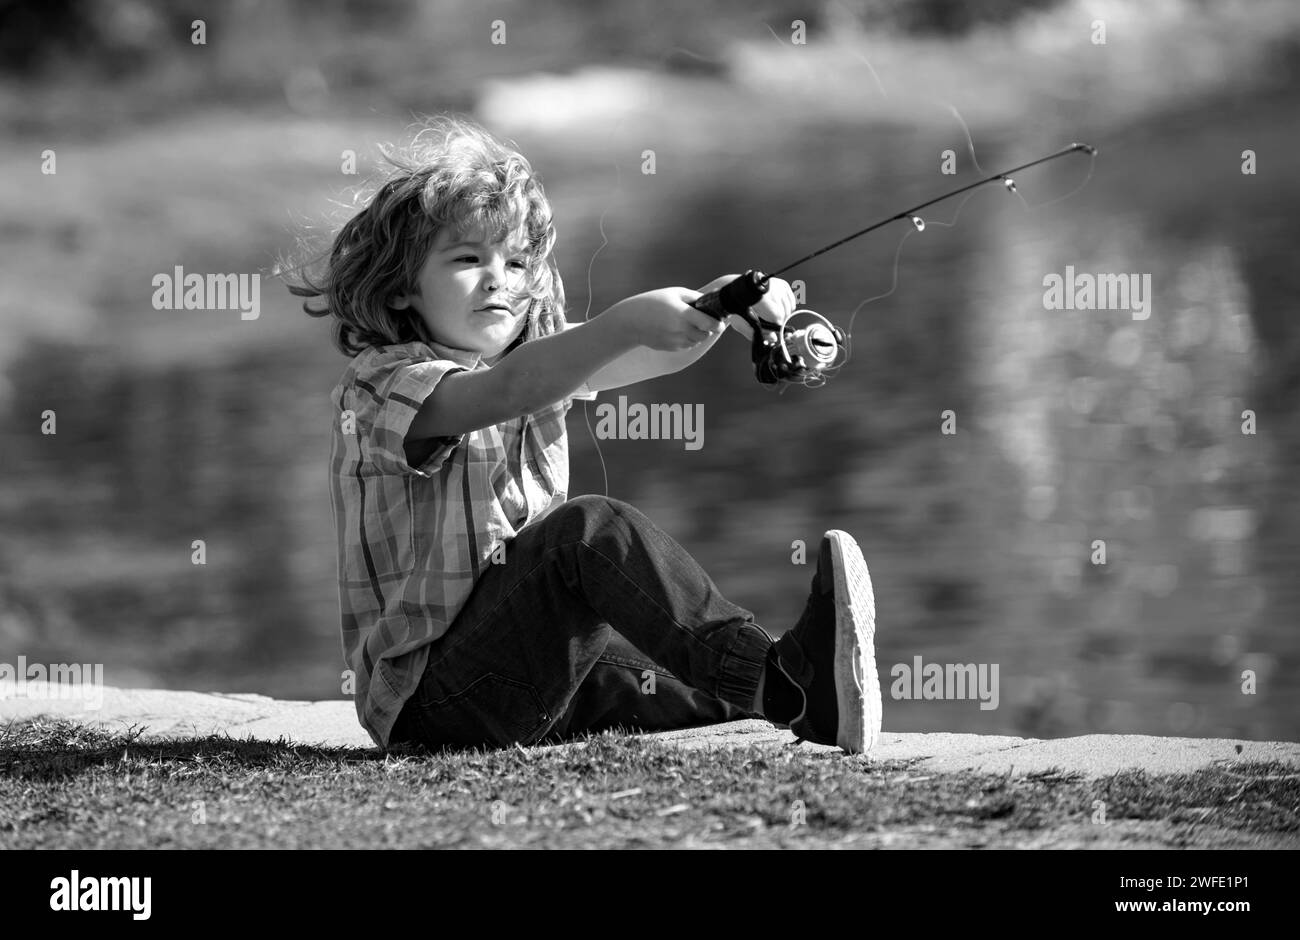 Boy fishing on small lake Black and White Stock Photos & Images